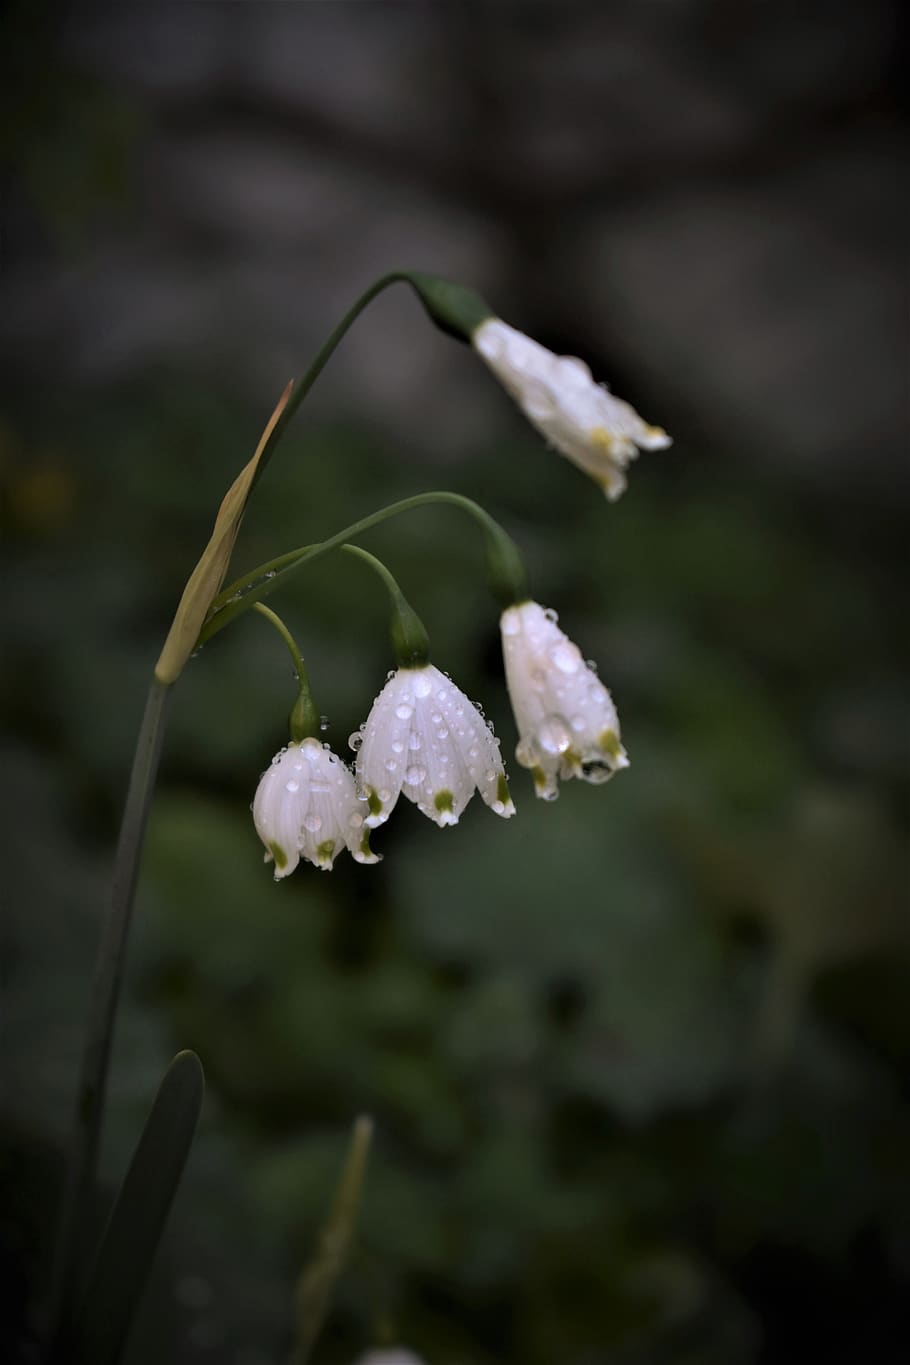 lily of the valley, spring, plant, garden, flower, blossom